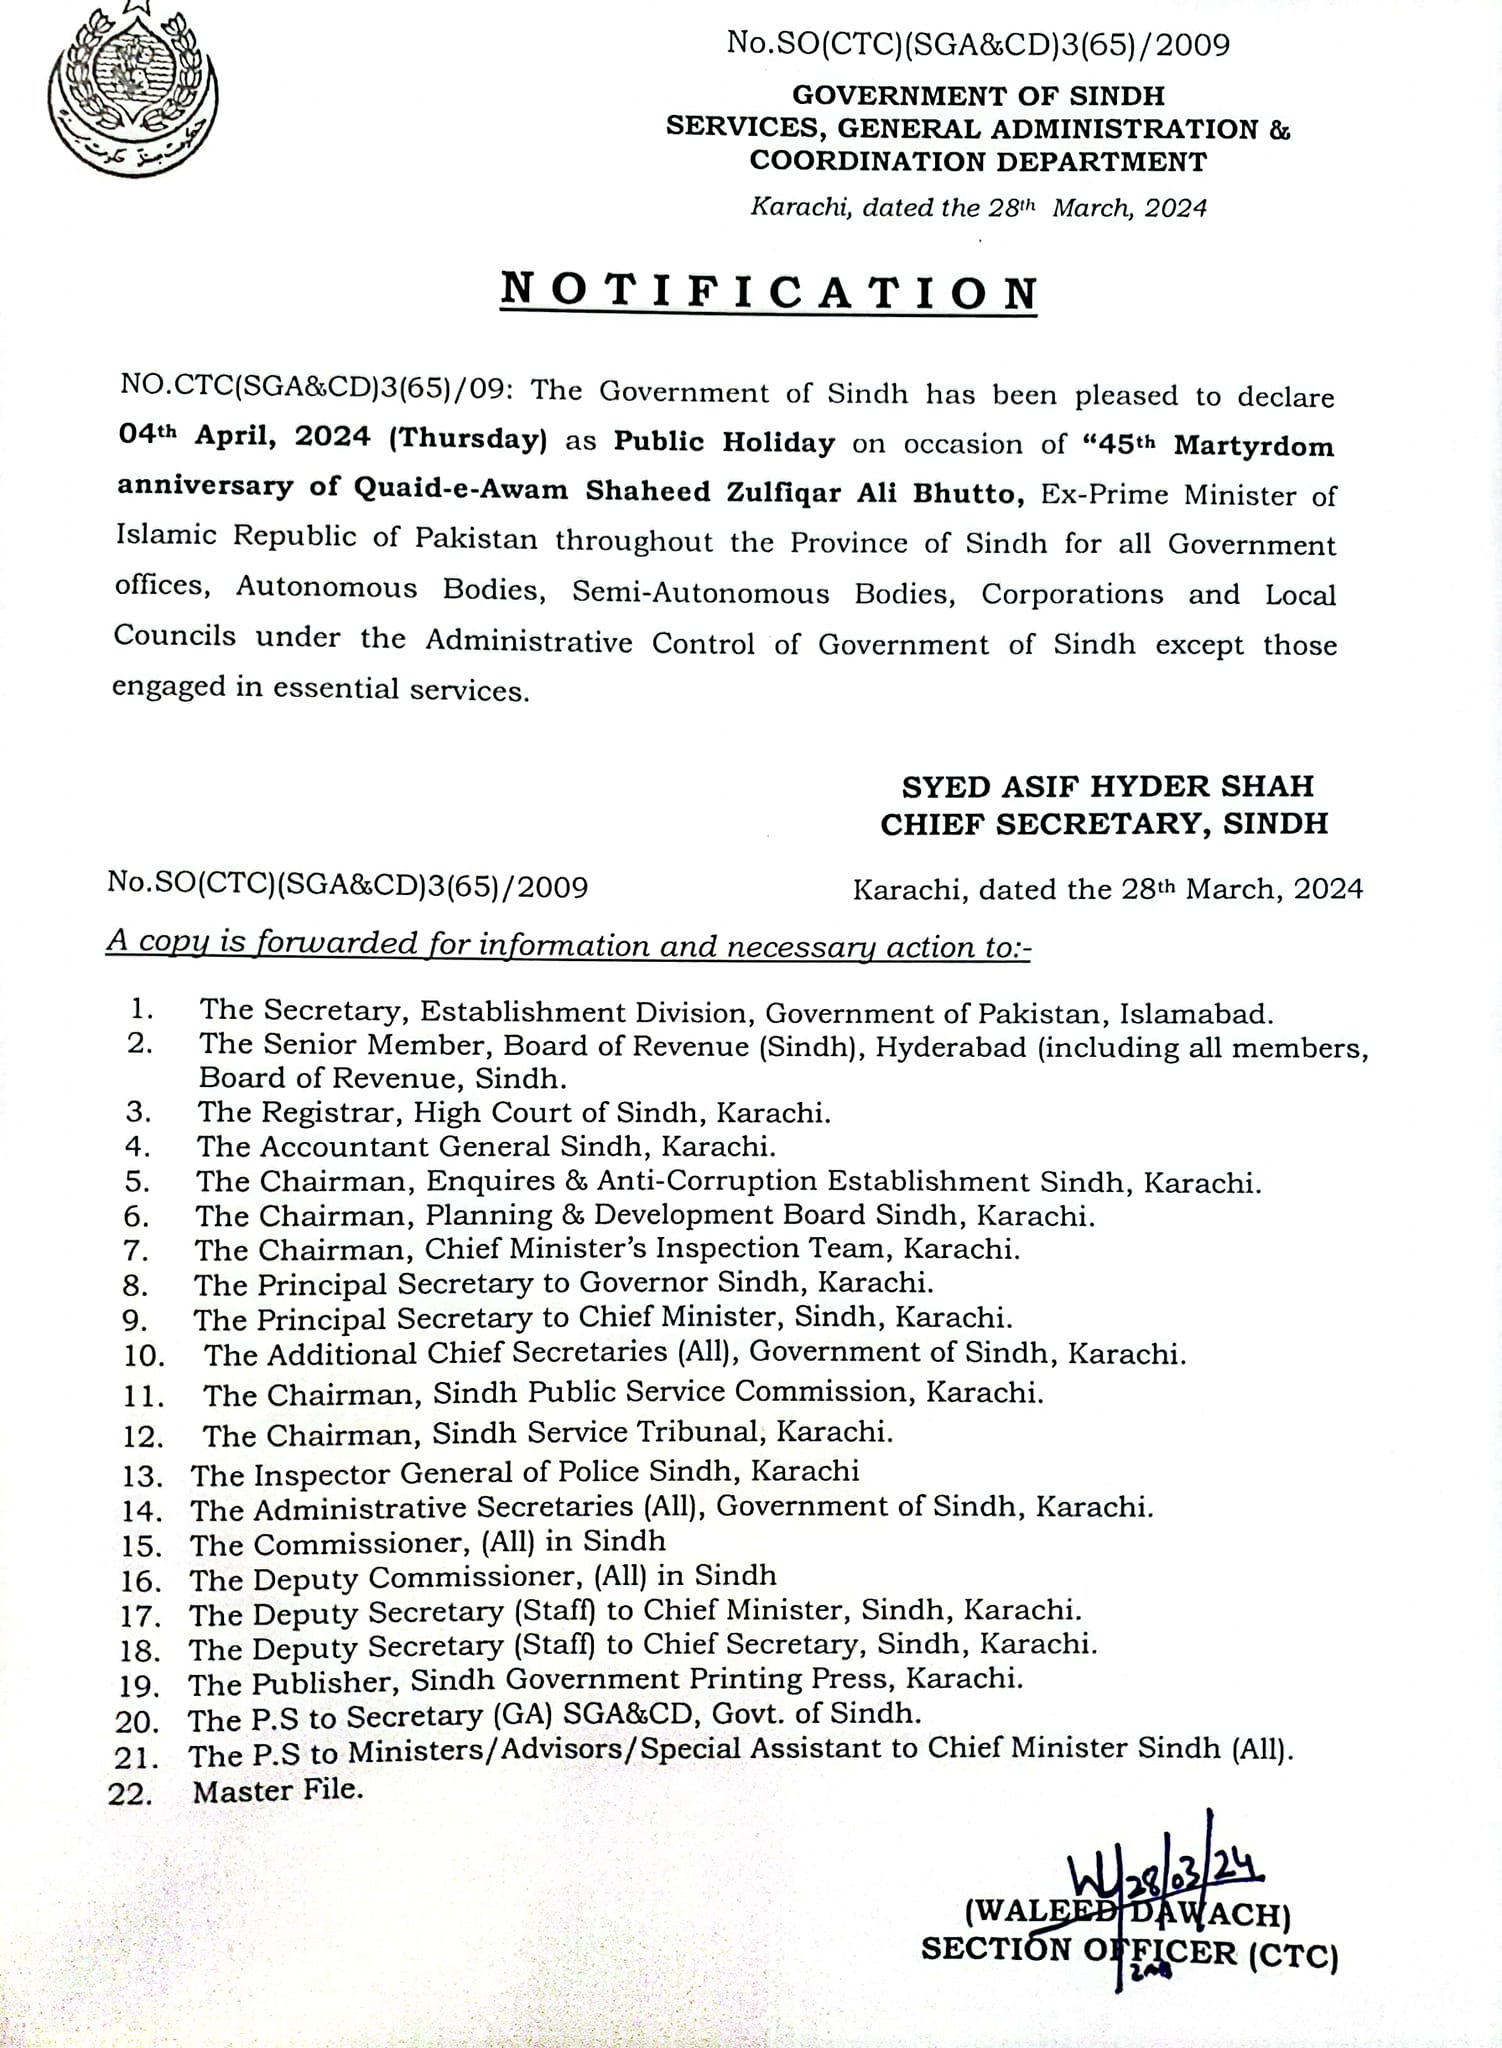 Notification of Public Holiday on 4 April 2024 (Thursday) in Sindh